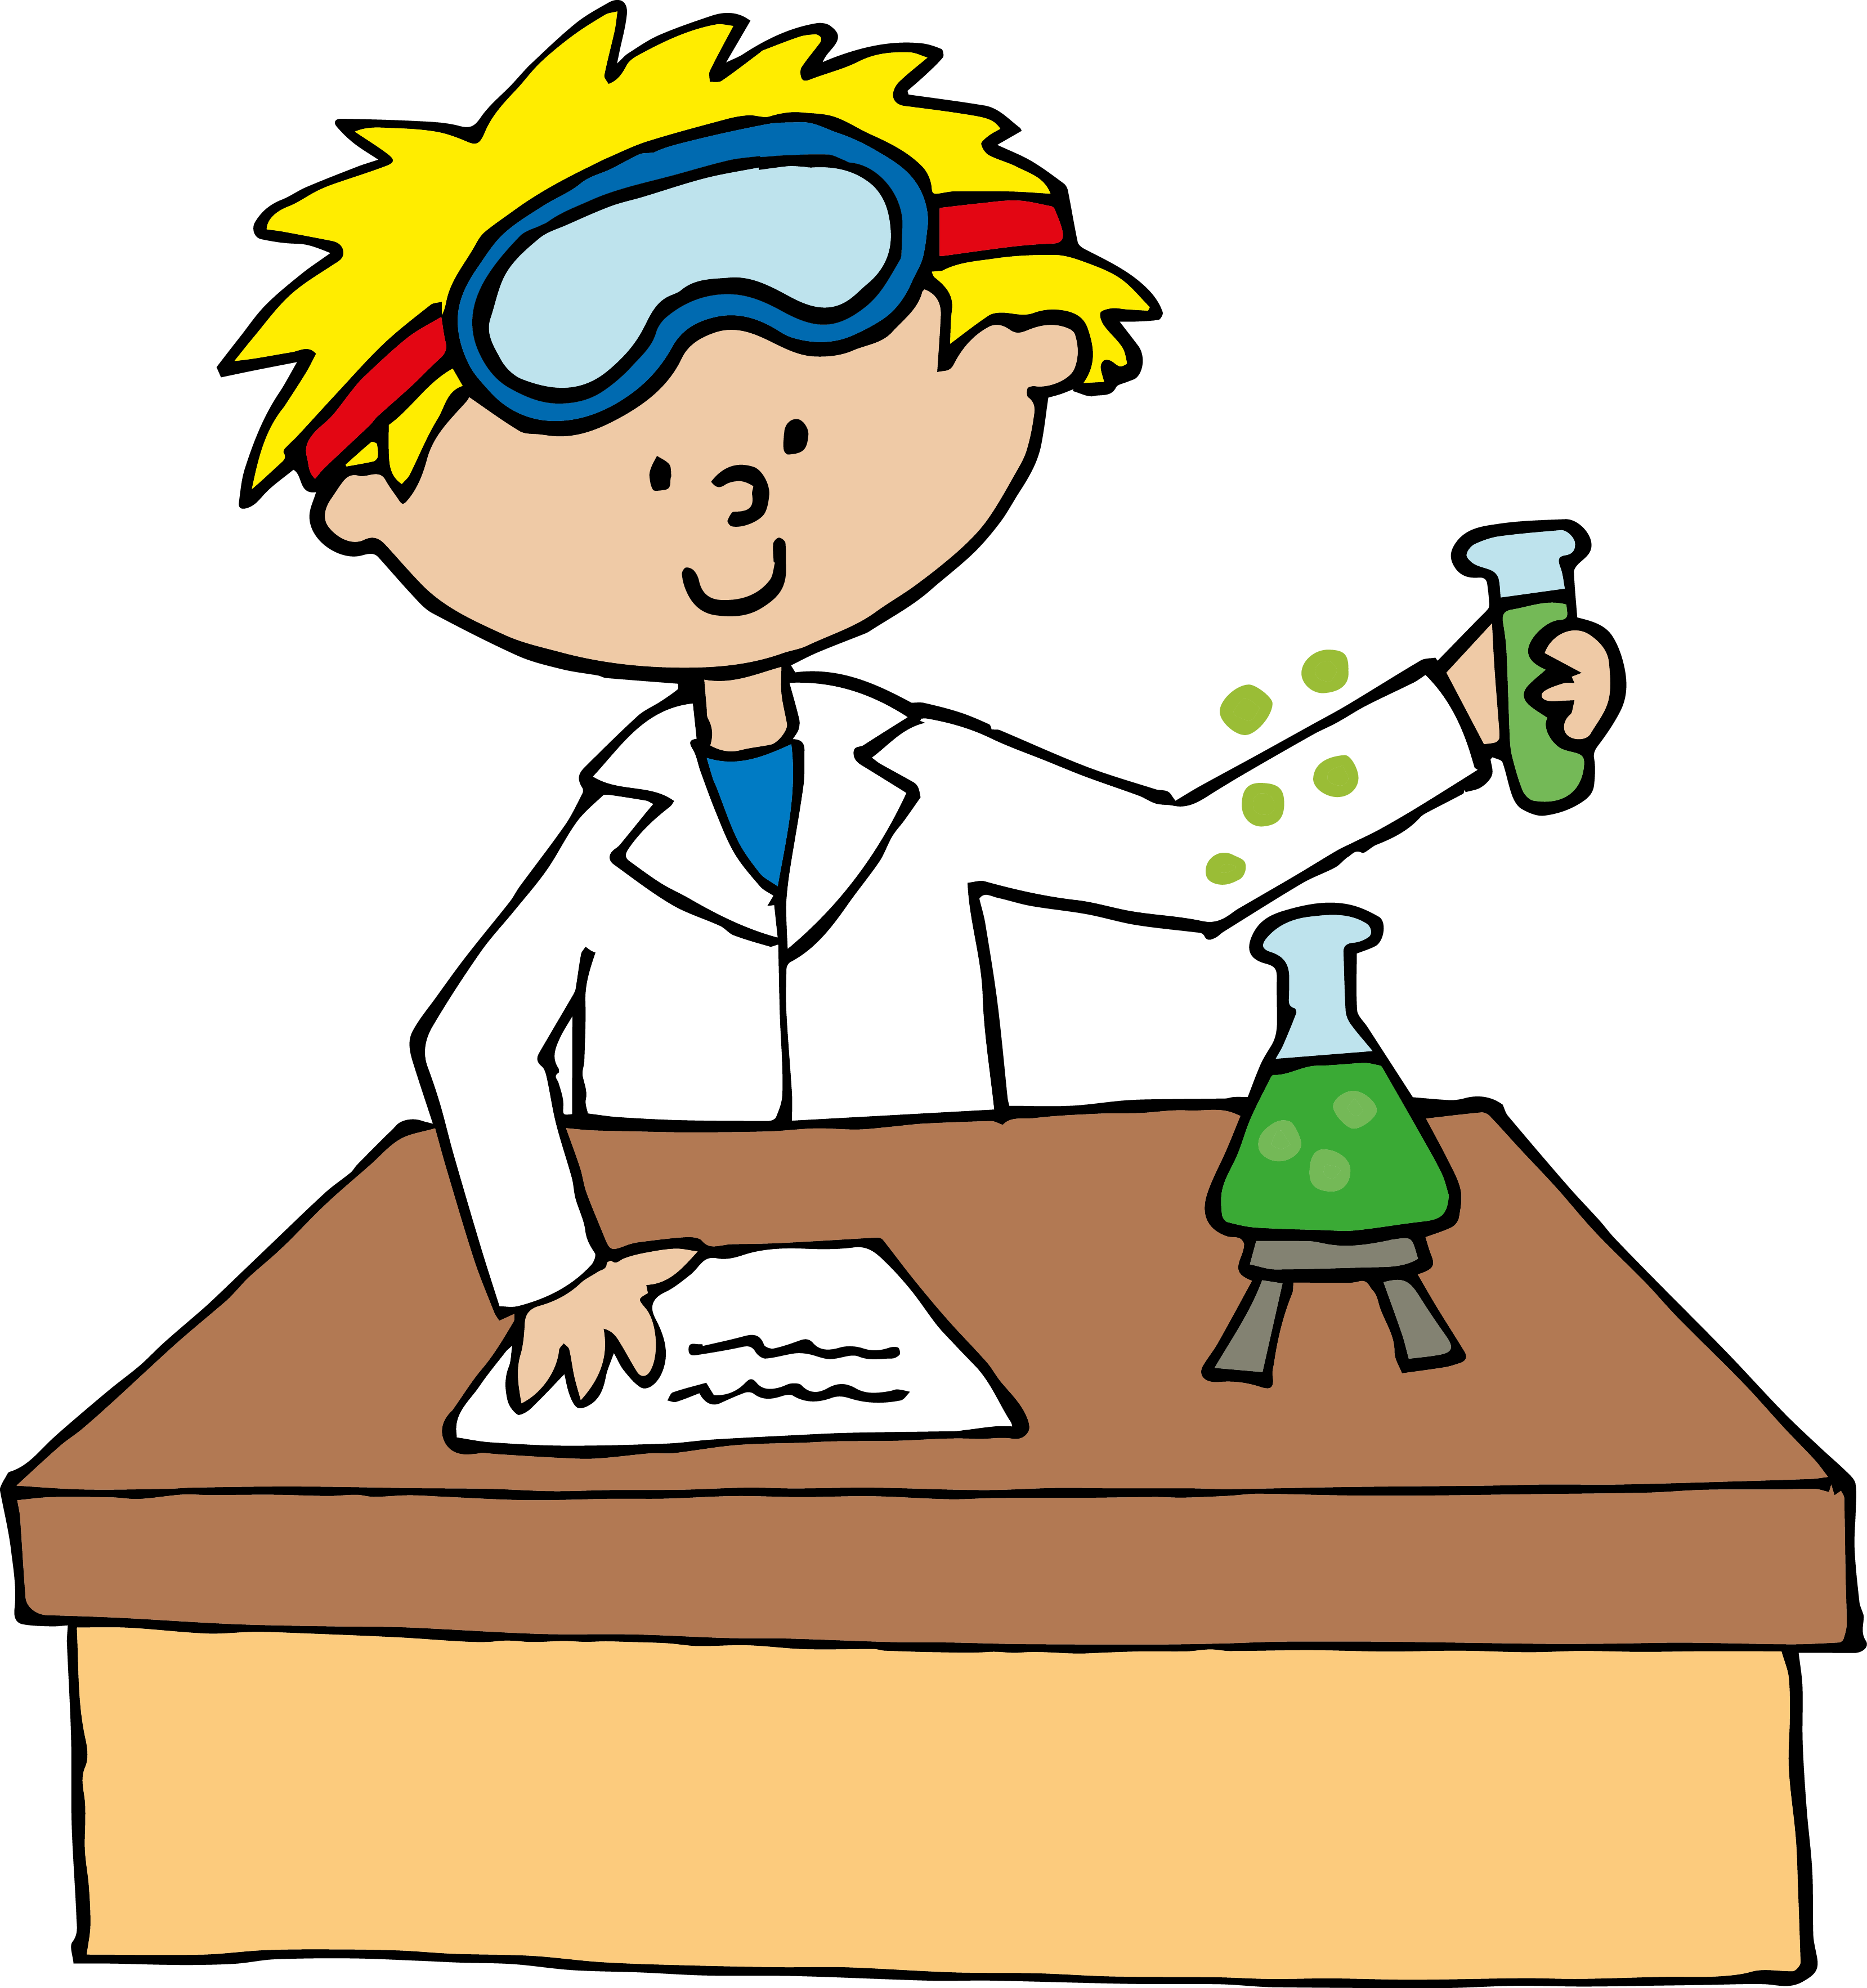 Scientist Timeline Nov. 18-Dec.2. The process for completing Science Projects will be taught by the teacher. December 11 - All Projects must be completed